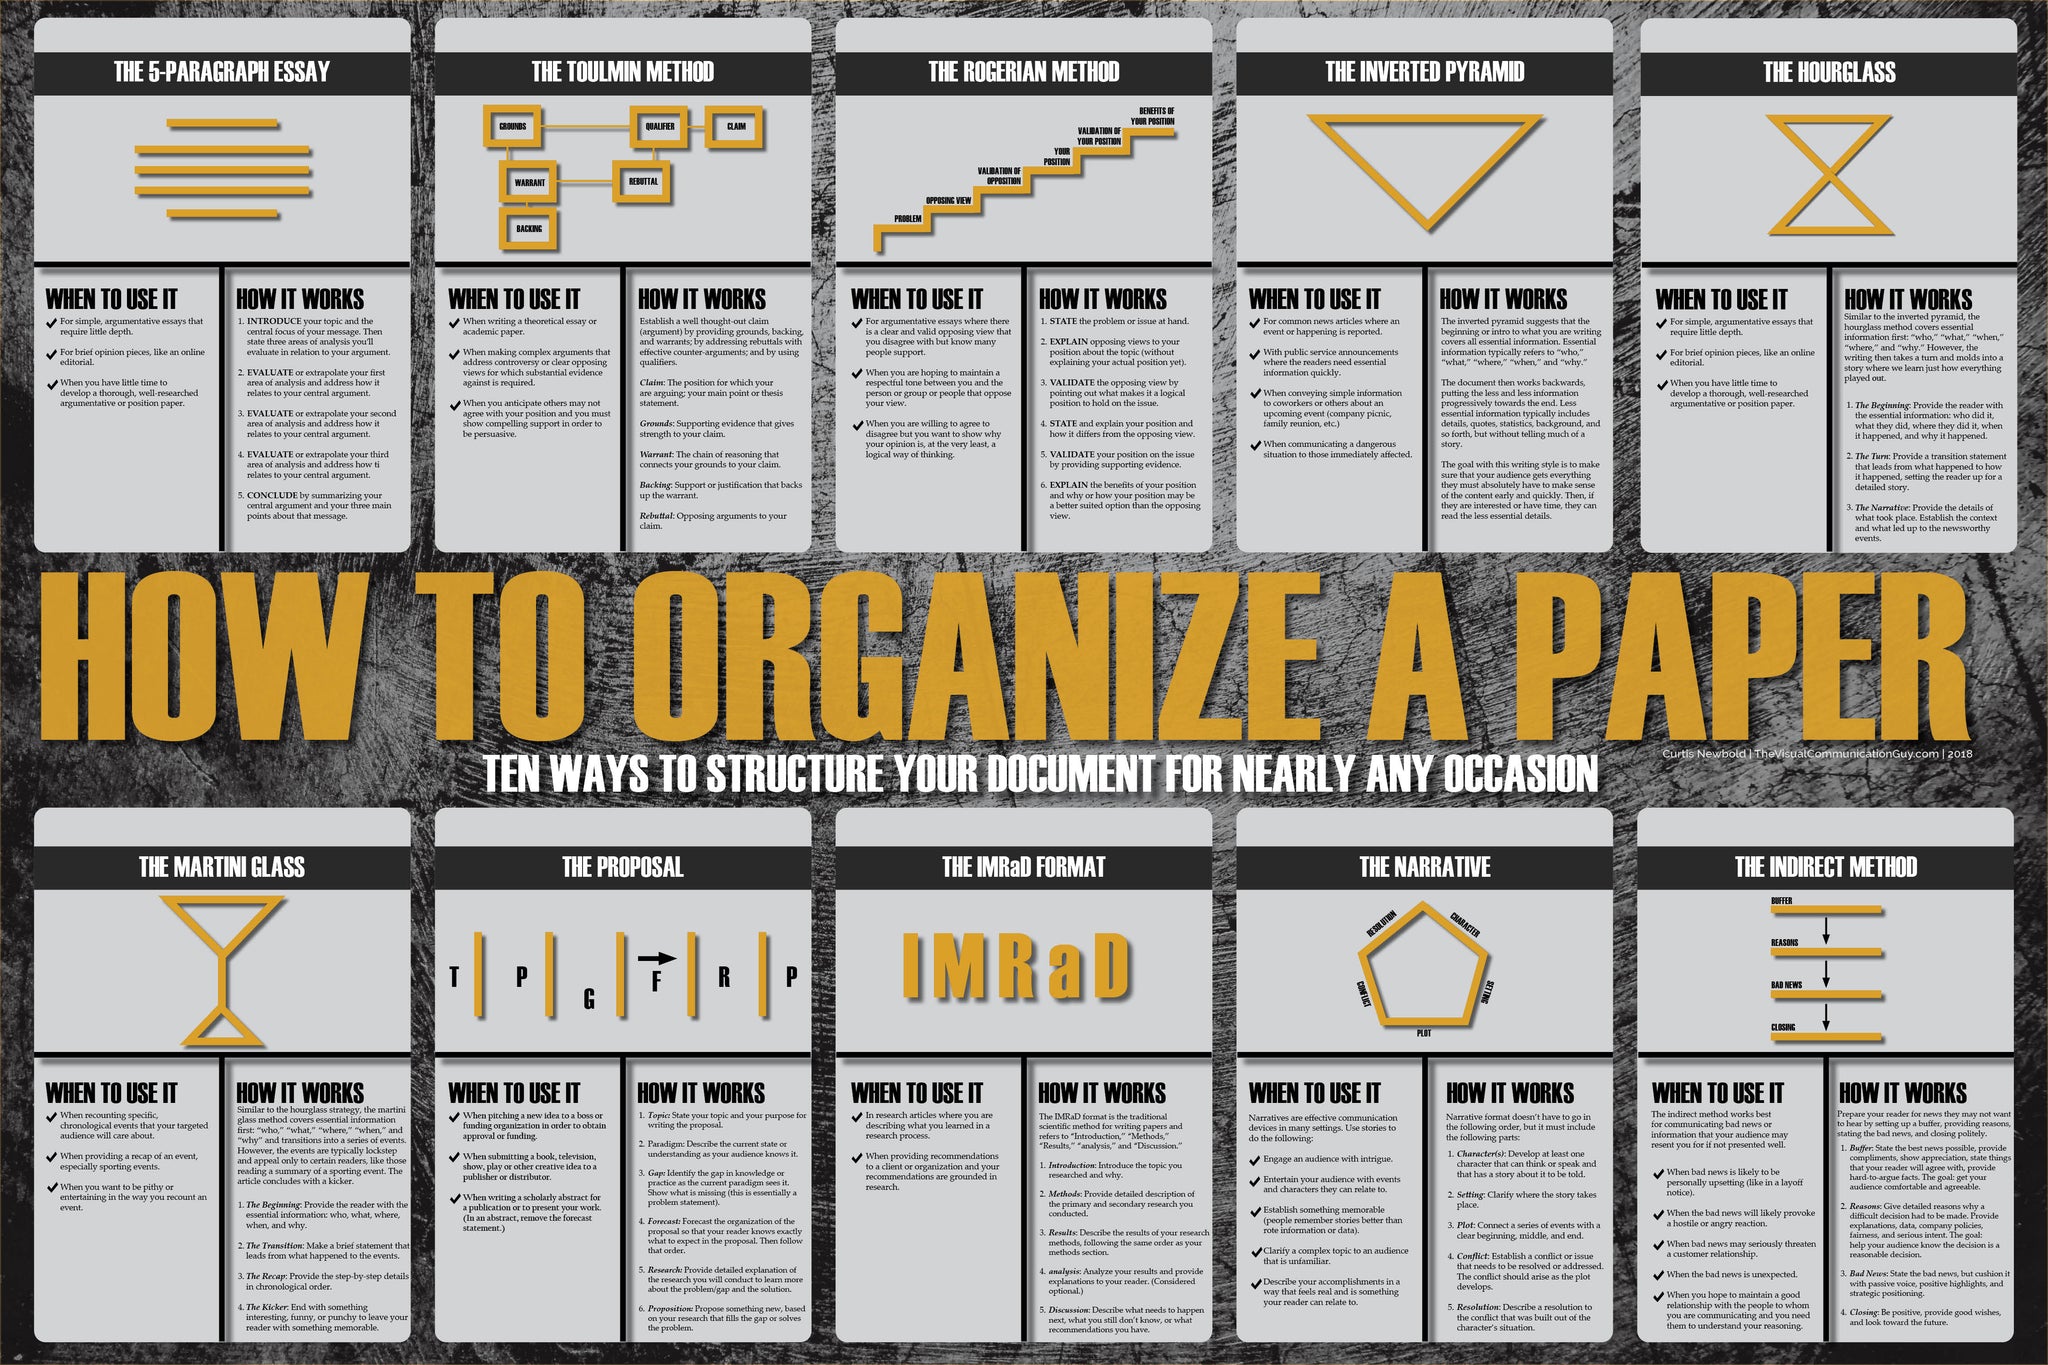 How to Organize a Paper 20x30 Poster Print